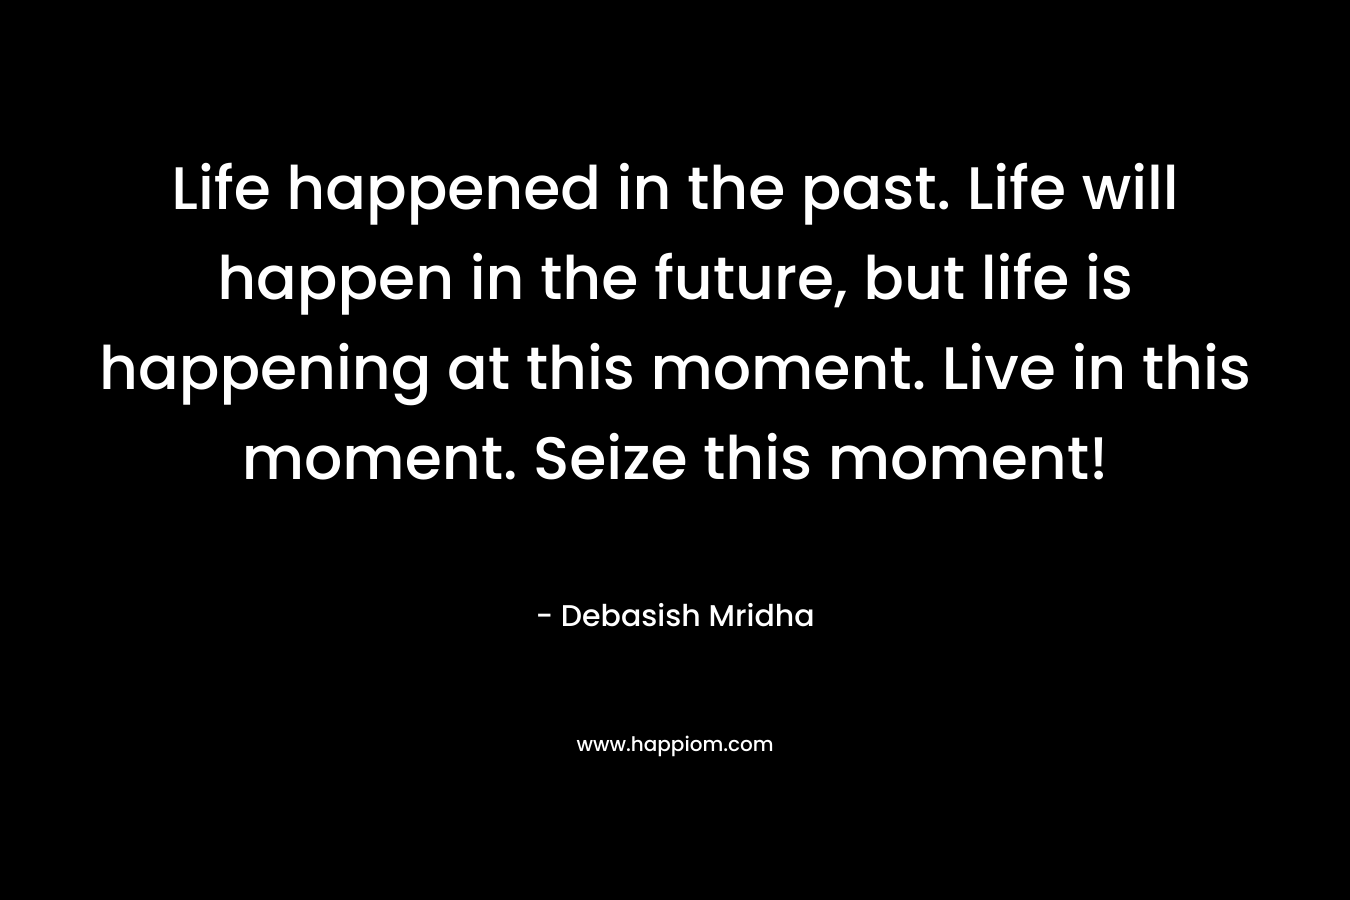 Life happened in the past. Life will happen in the future, but life is happening at this moment. Live in this moment. Seize this moment!